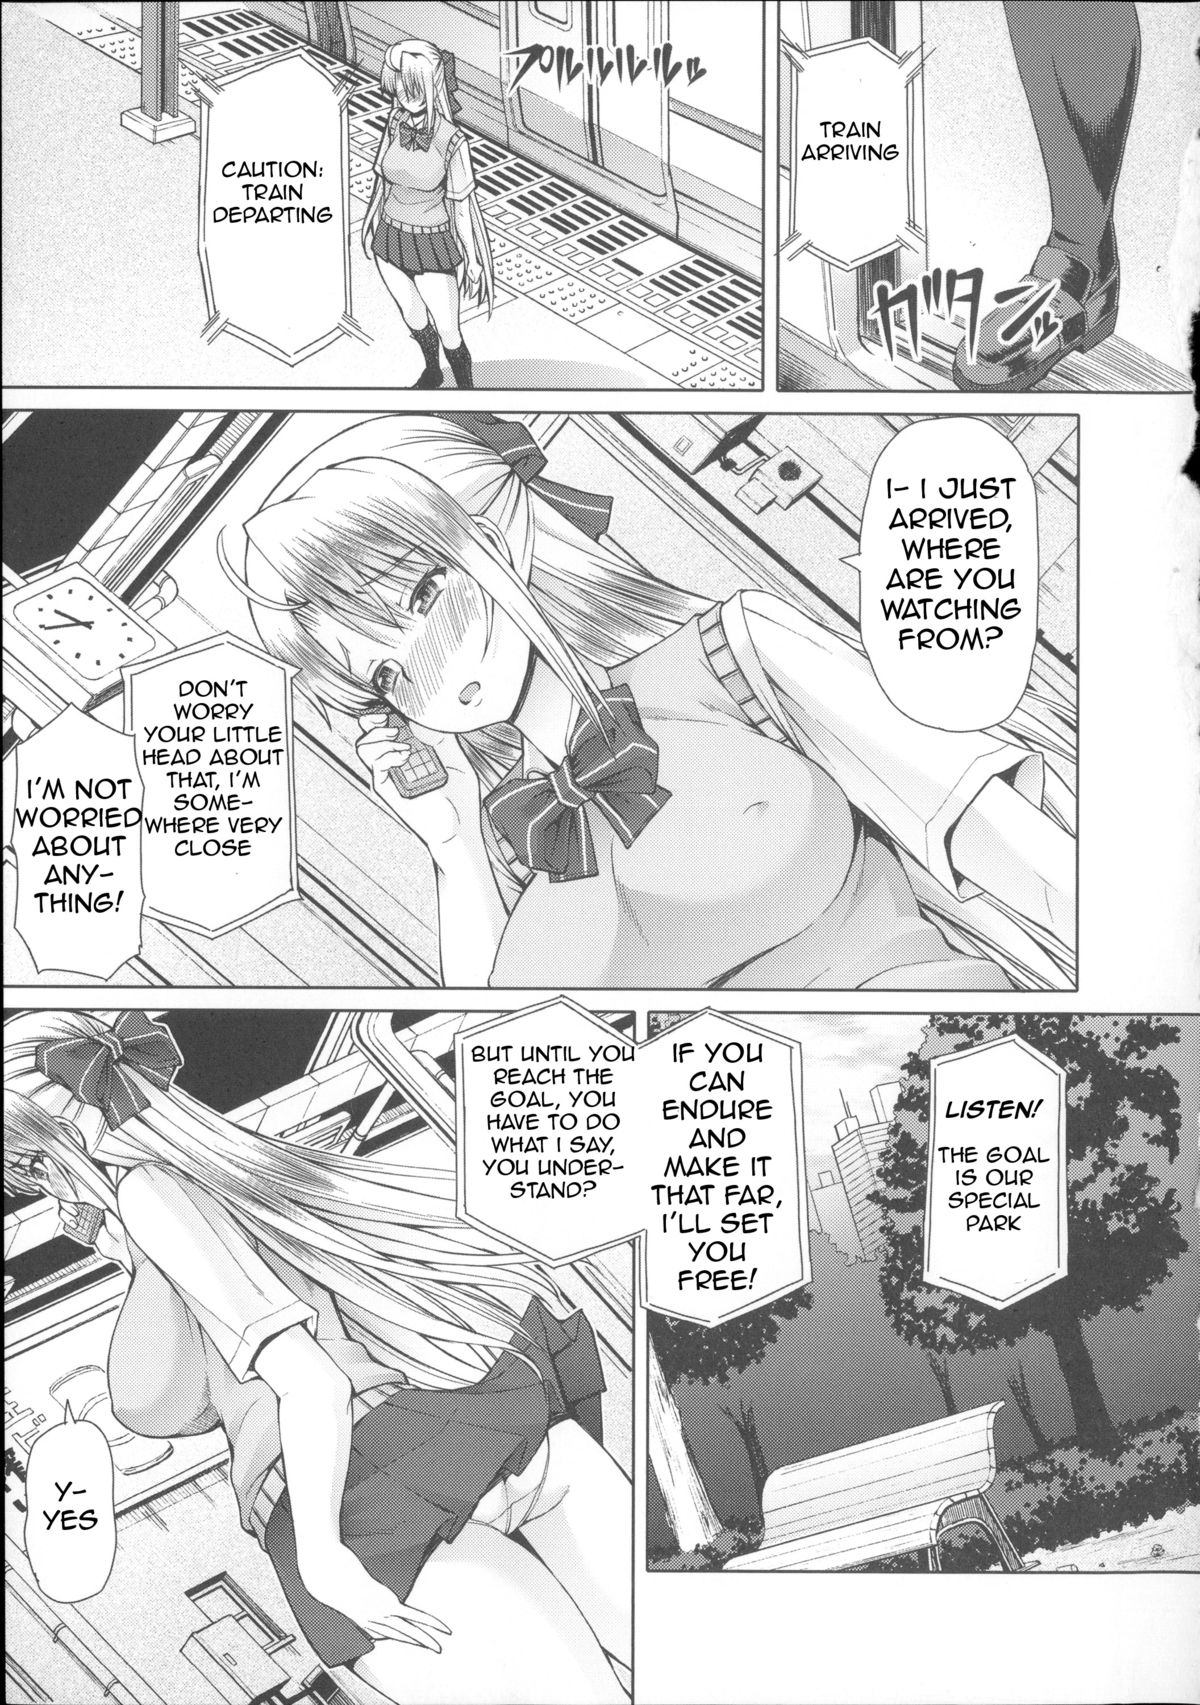 [RED-RUM] LOVE & PEACH Ch. 0 [English] (JunklessTrunk) page 13 full